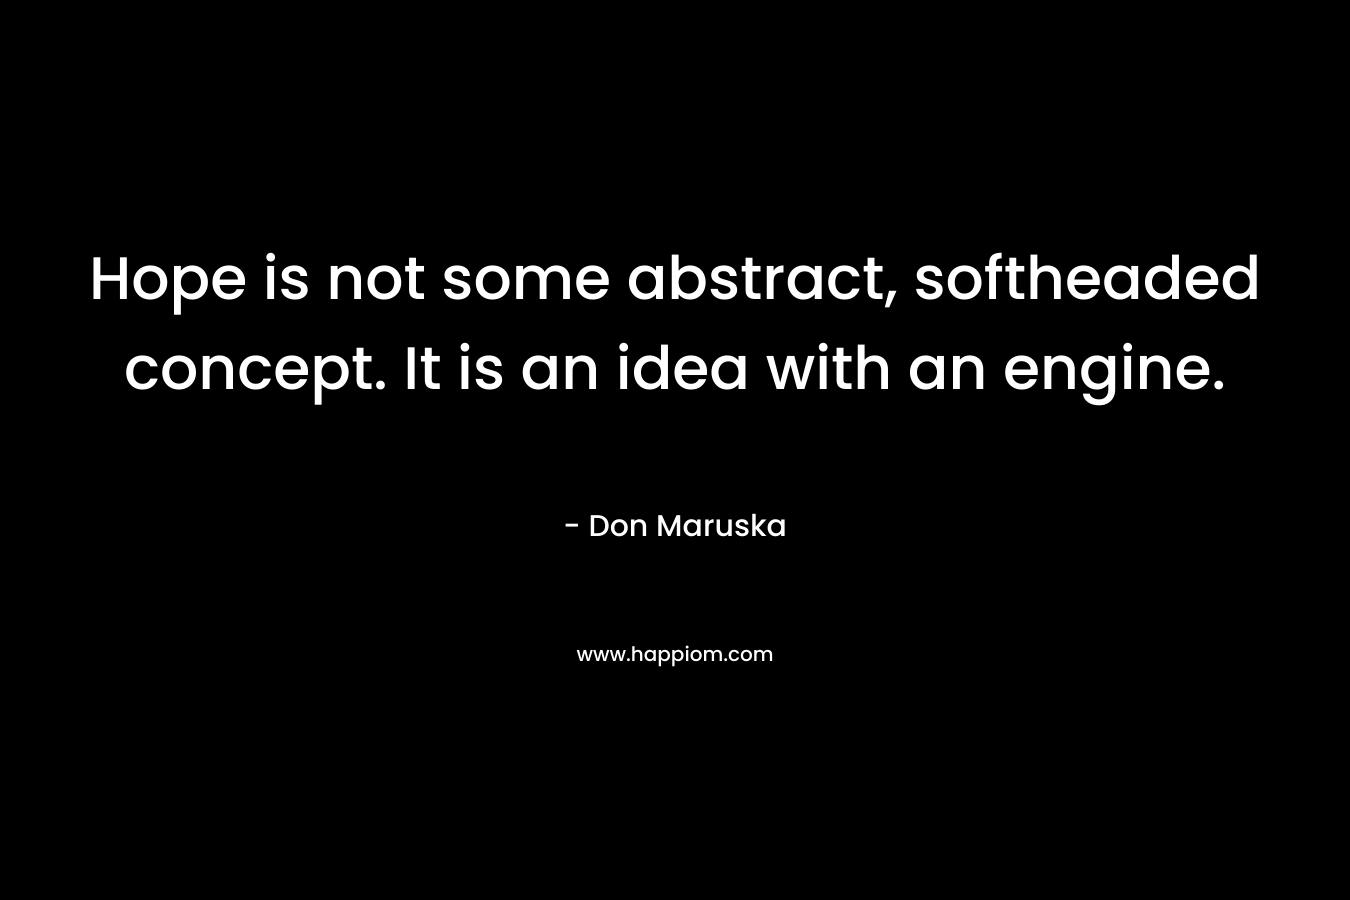 Hope is not some abstract, softheaded concept. It is an idea with an engine. – Don Maruska